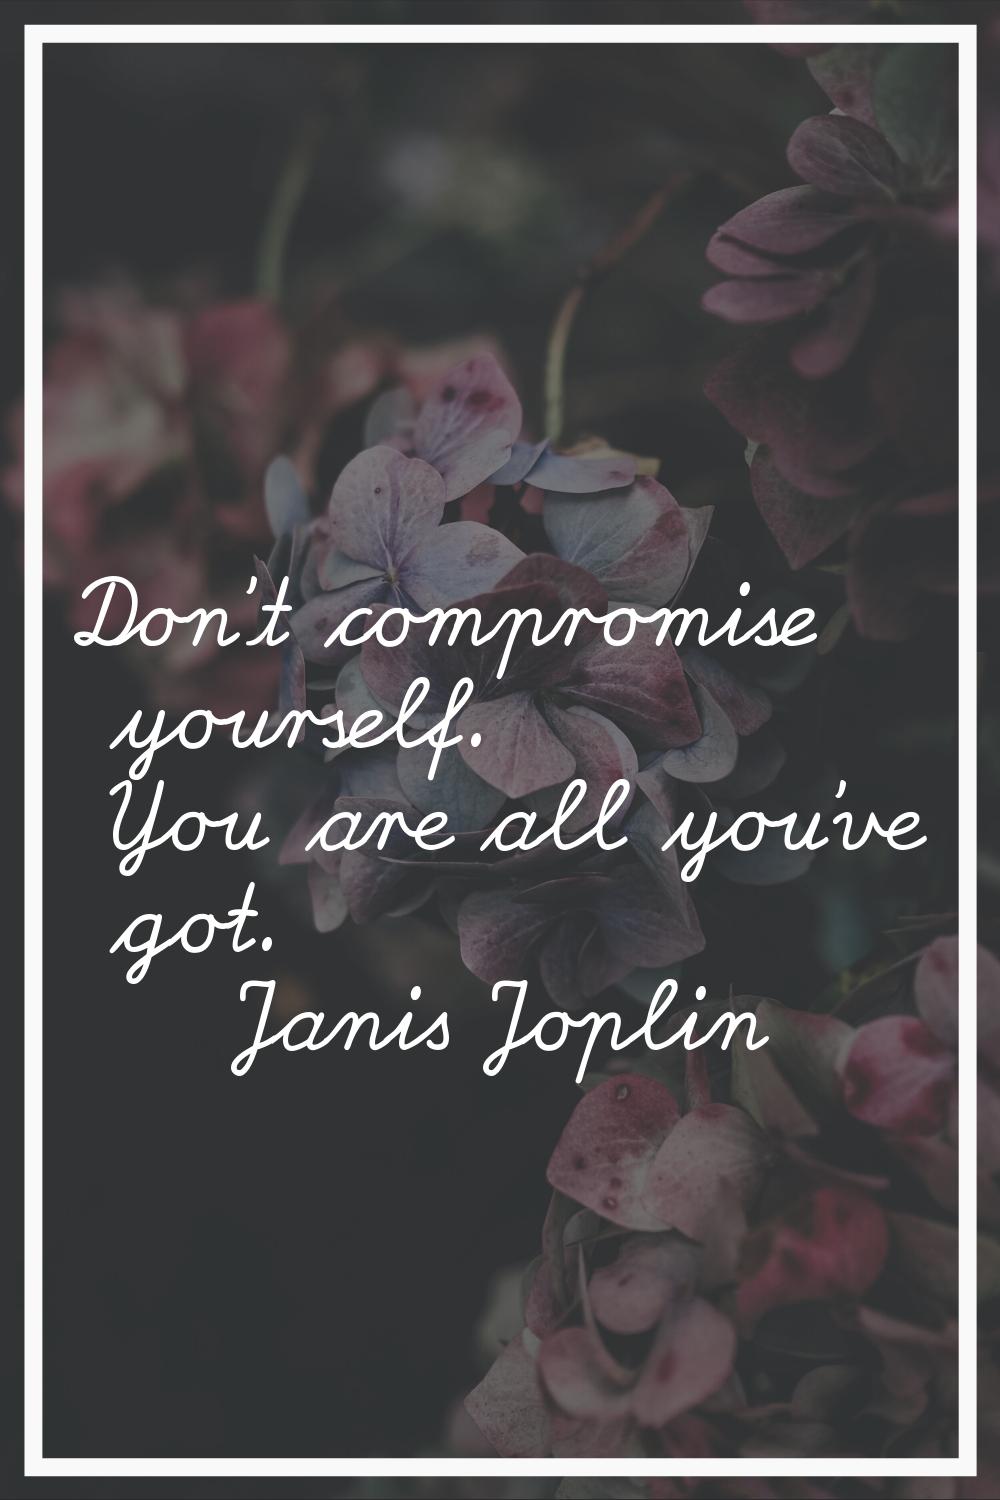 Don't compromise yourself. You are all you've got.